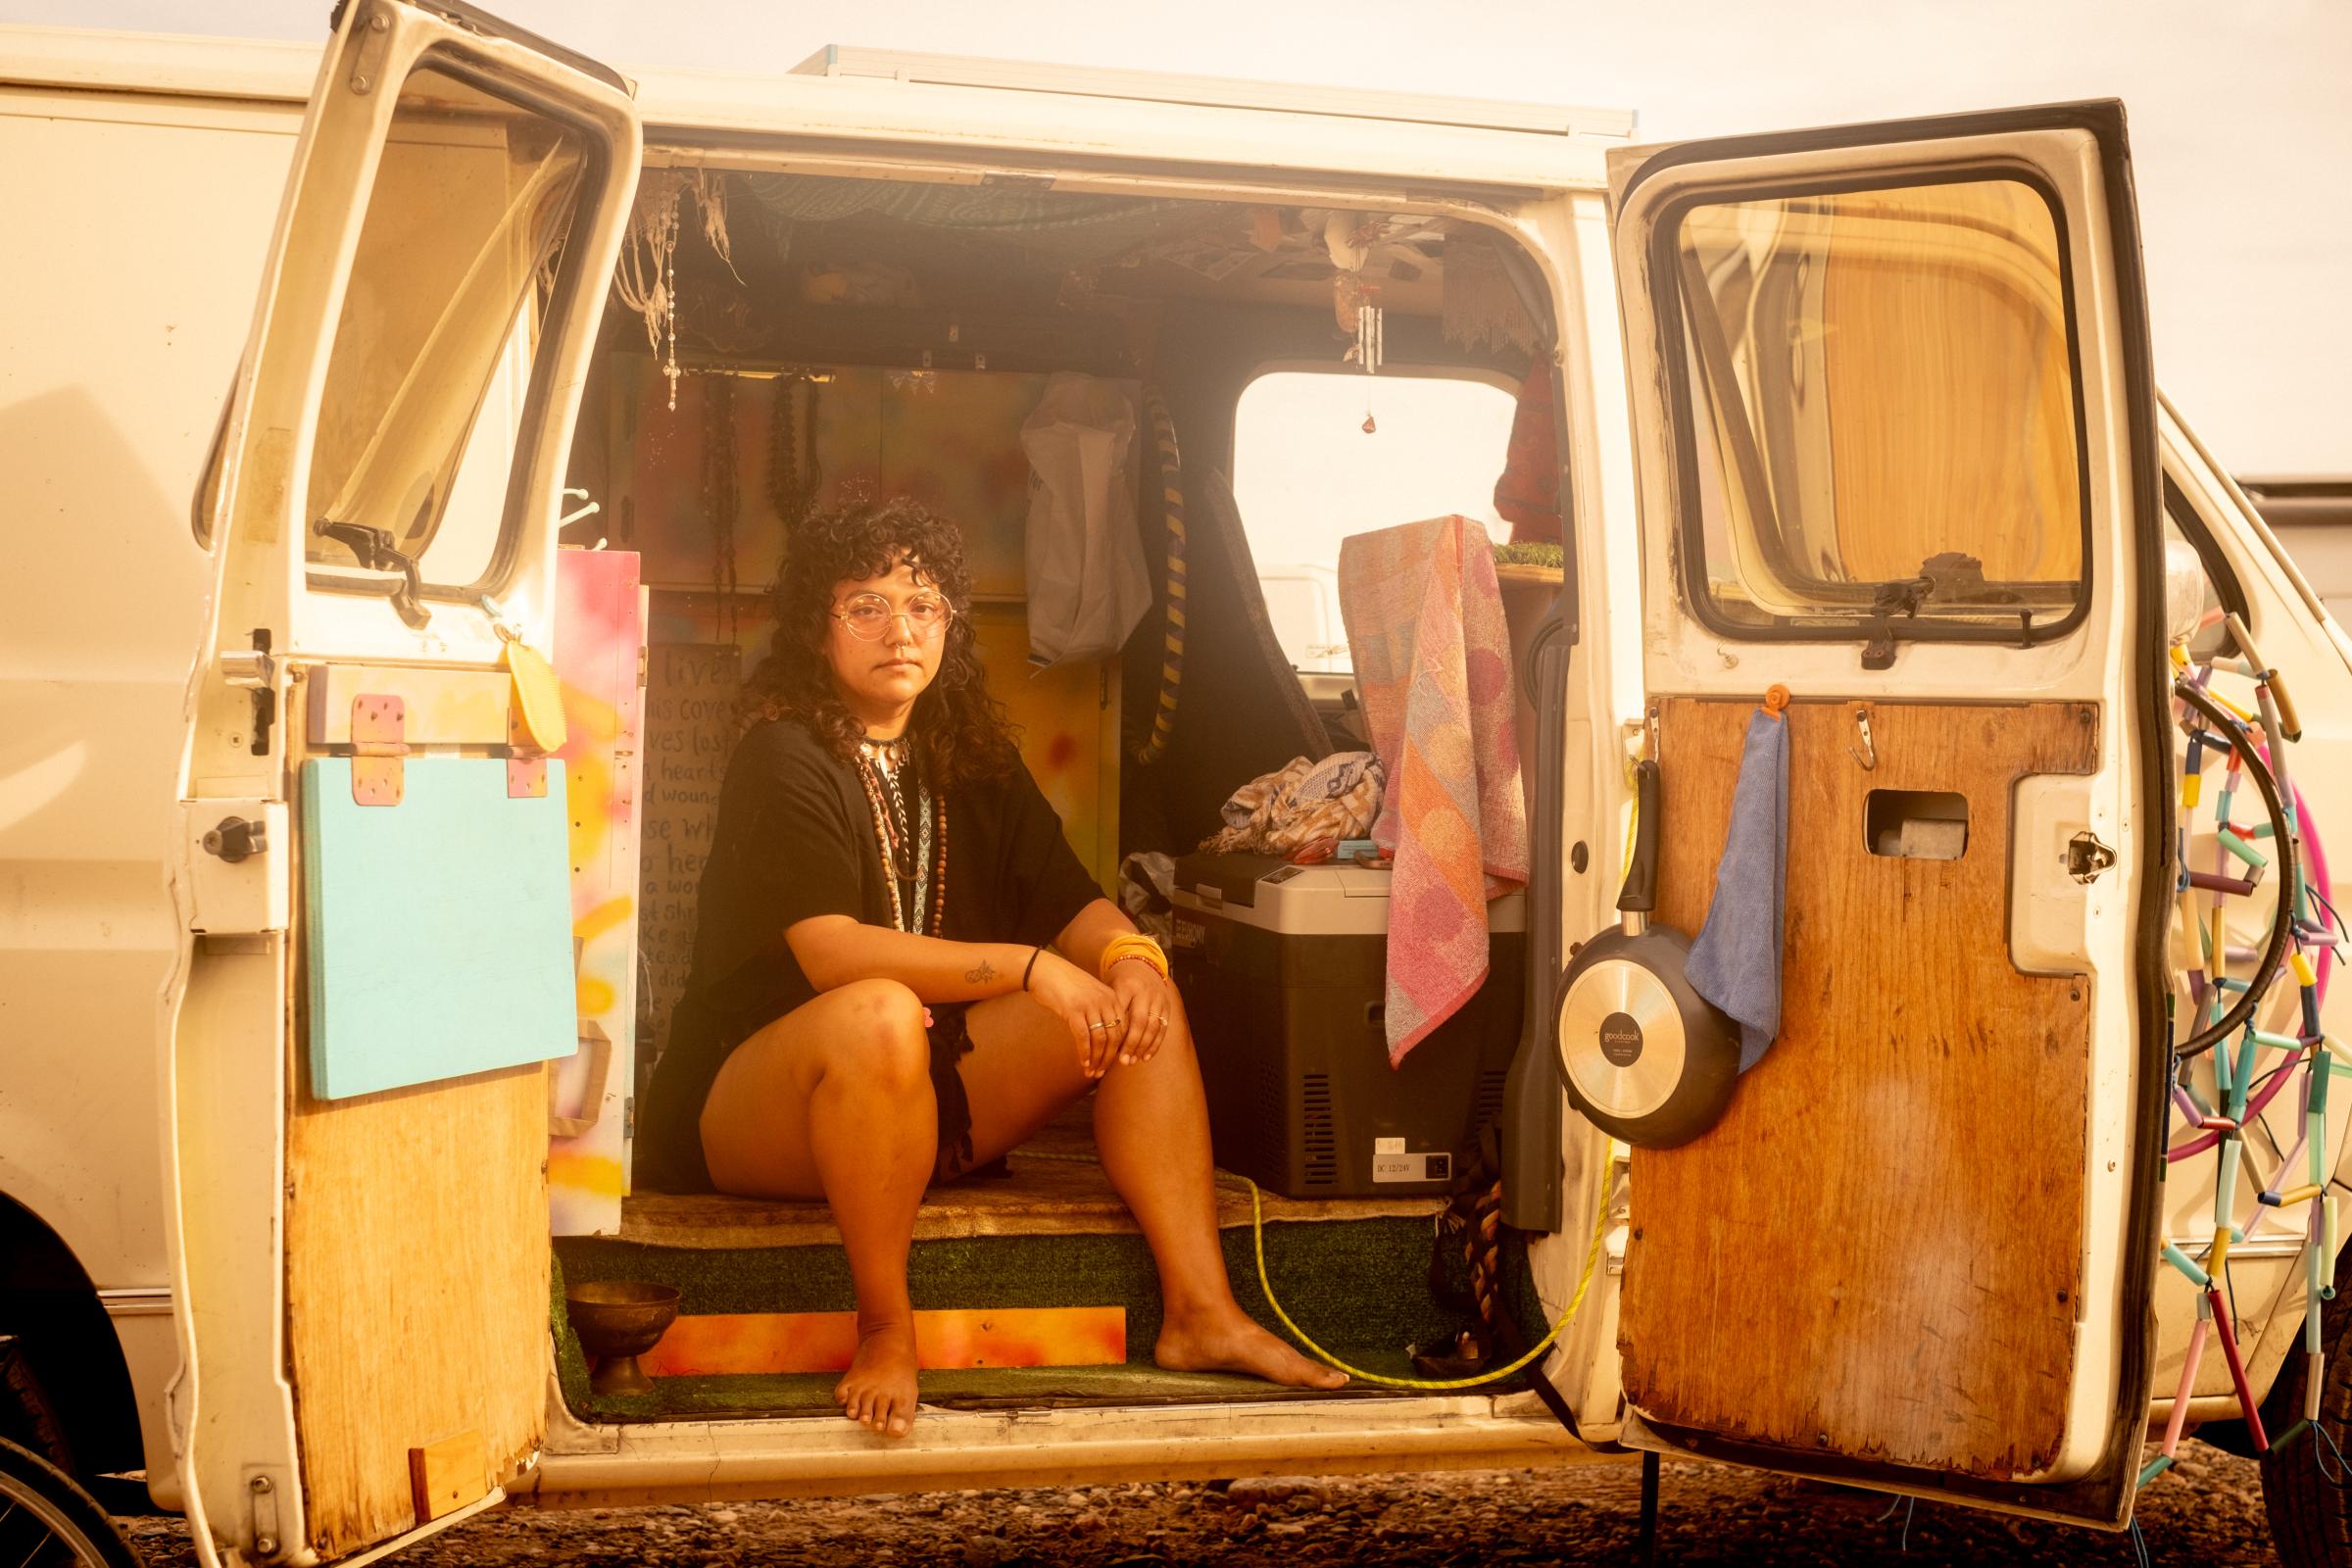 A Warm Winter (An Ongoing Journey) - Kimmerly in her rig. Ehrenberg, Arizona.